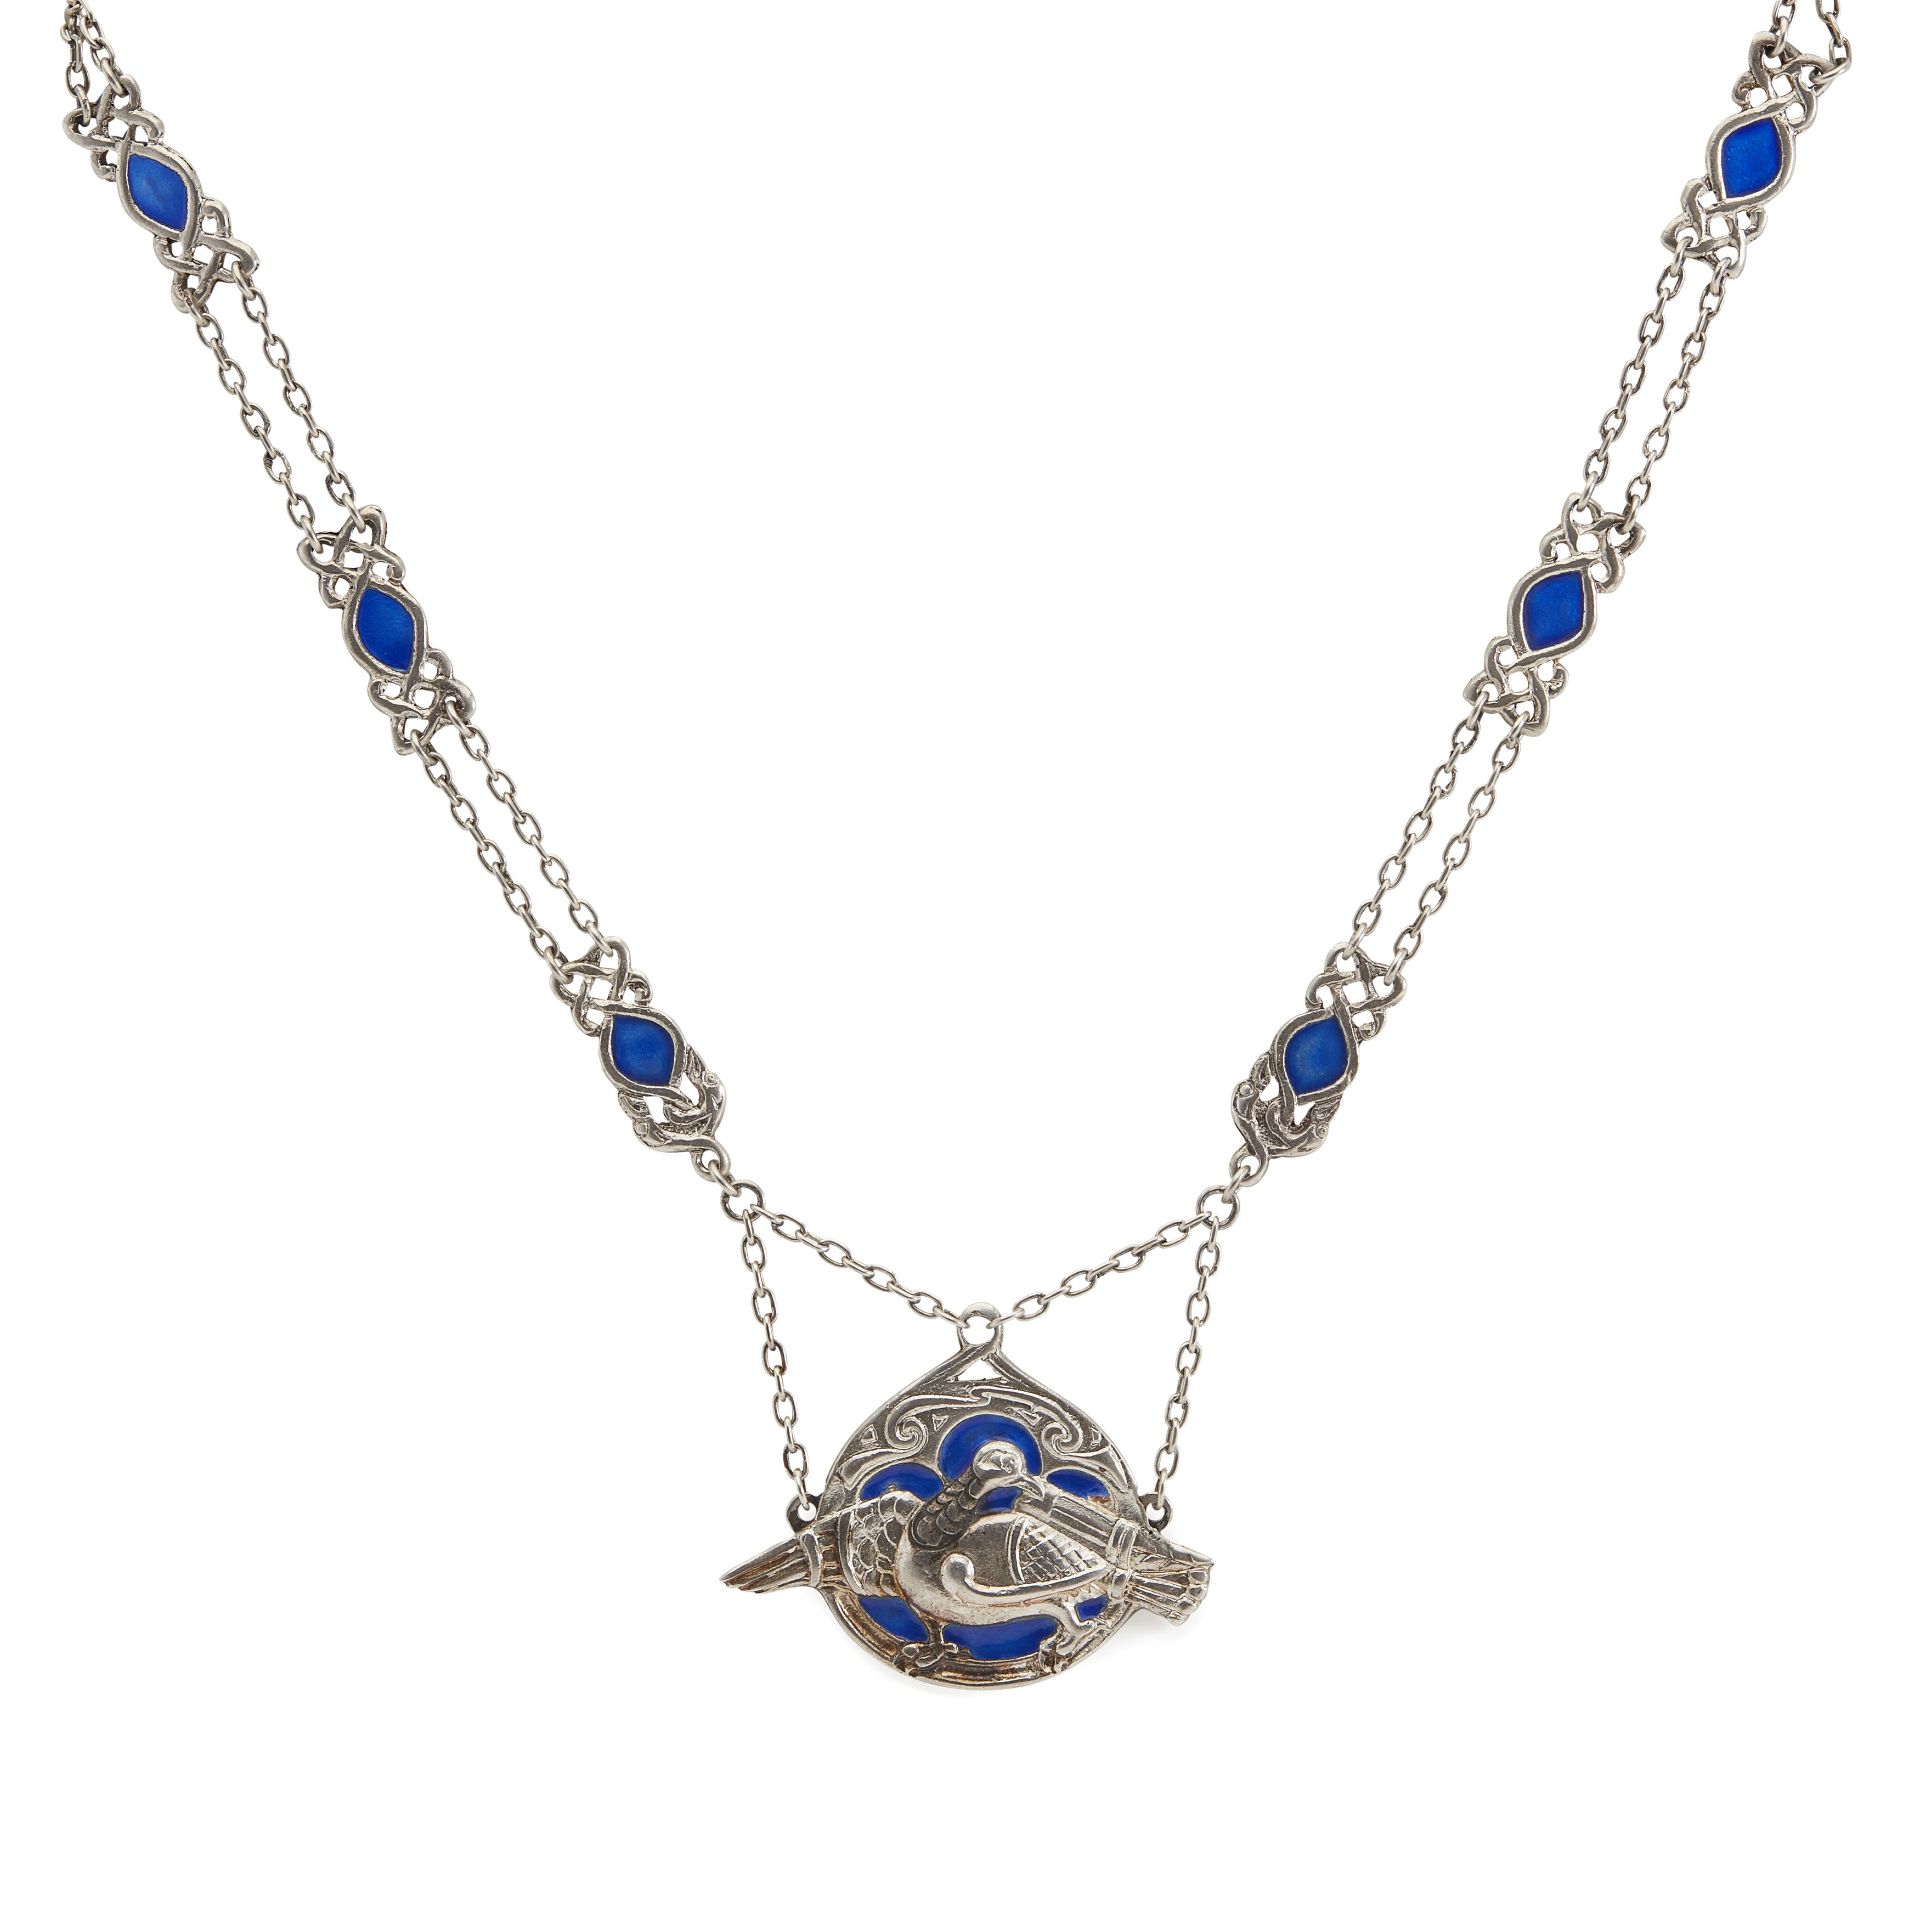 IONA - A SCOTTISH PROVINCIAL SILVER AND ENAMEL NECKLACE ALEXANDER RITCHIE